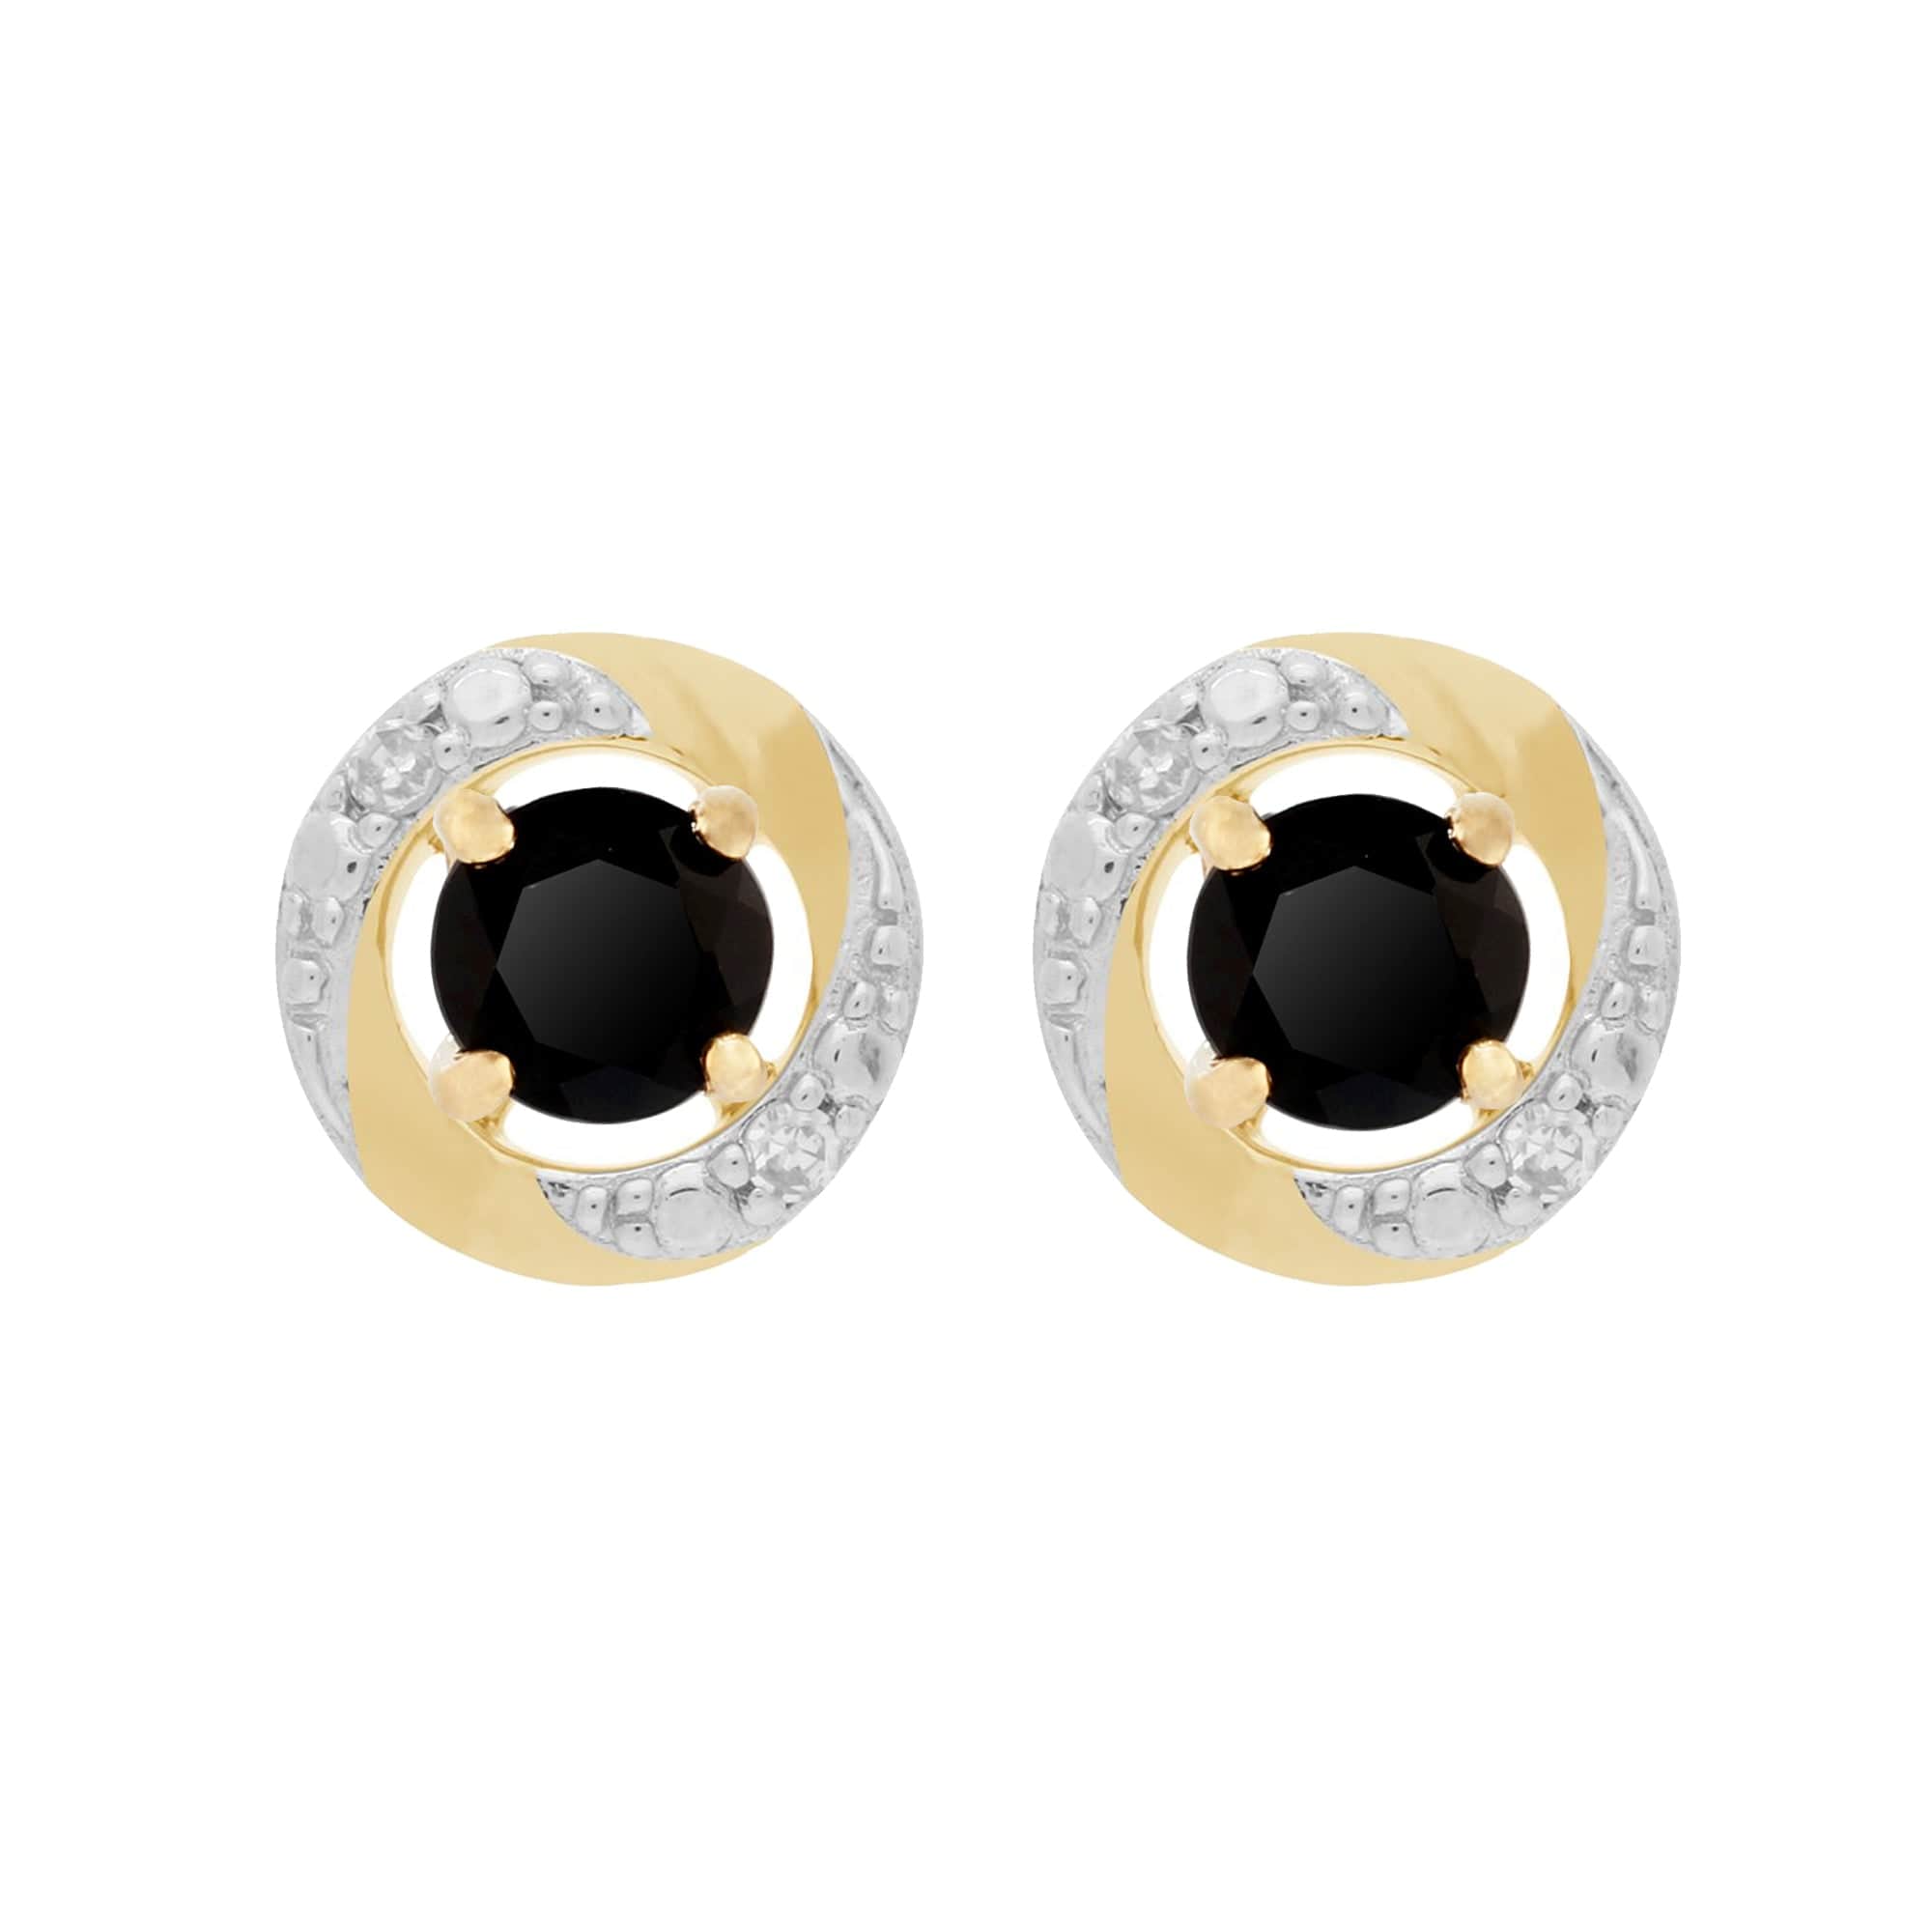 183E0083339-191E0374019 Classic Round Black Onyx Stud Earrings with Detachable Diamond Halo Ear Jacket in 9ct Yellow Gold 1